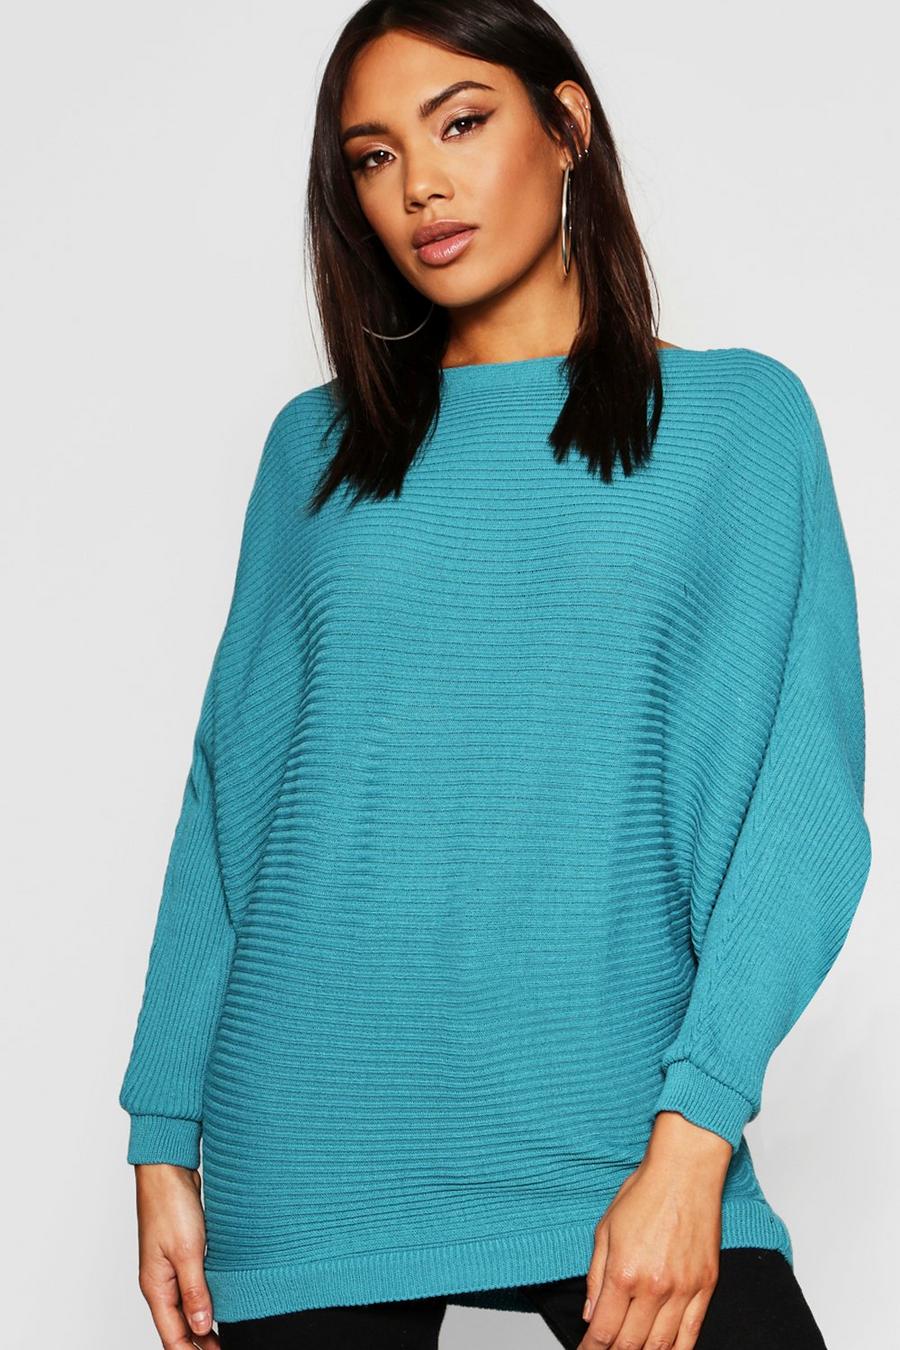 Teal Oversized Rib Knit Batwing Sweater image number 1